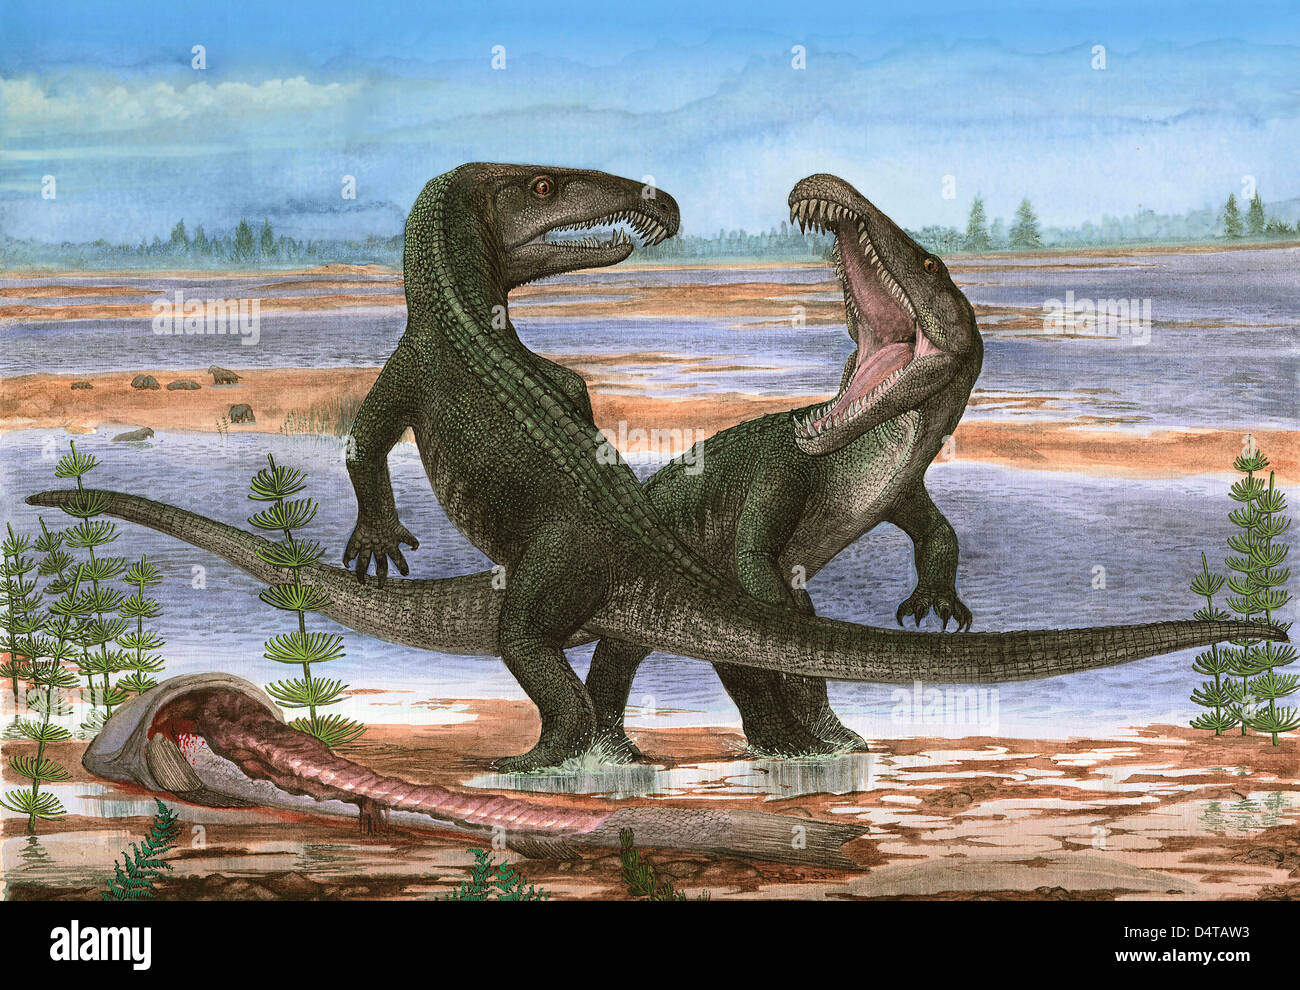 Confrontation between Archosaurus rossicus, a prehistoric animal from the Paleozoic era. Stock Photo